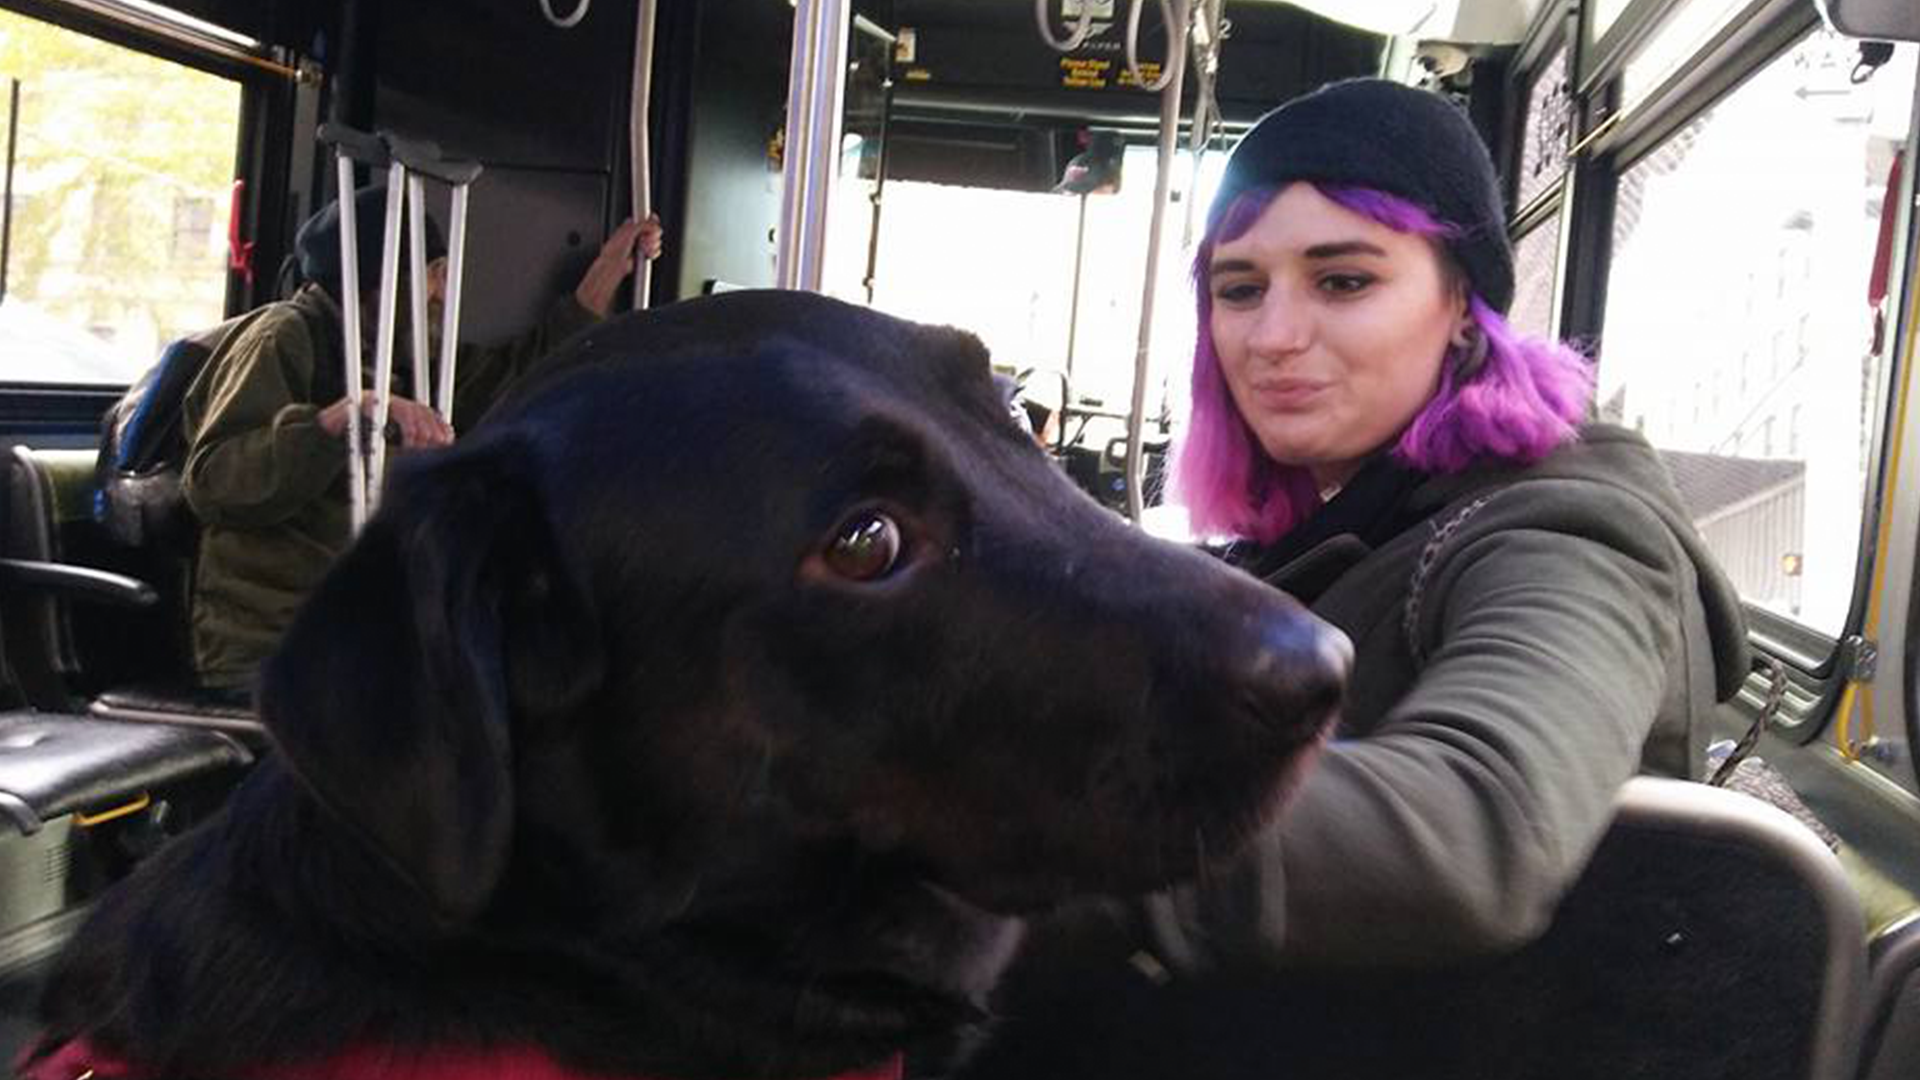 can you bring dogs on the bus